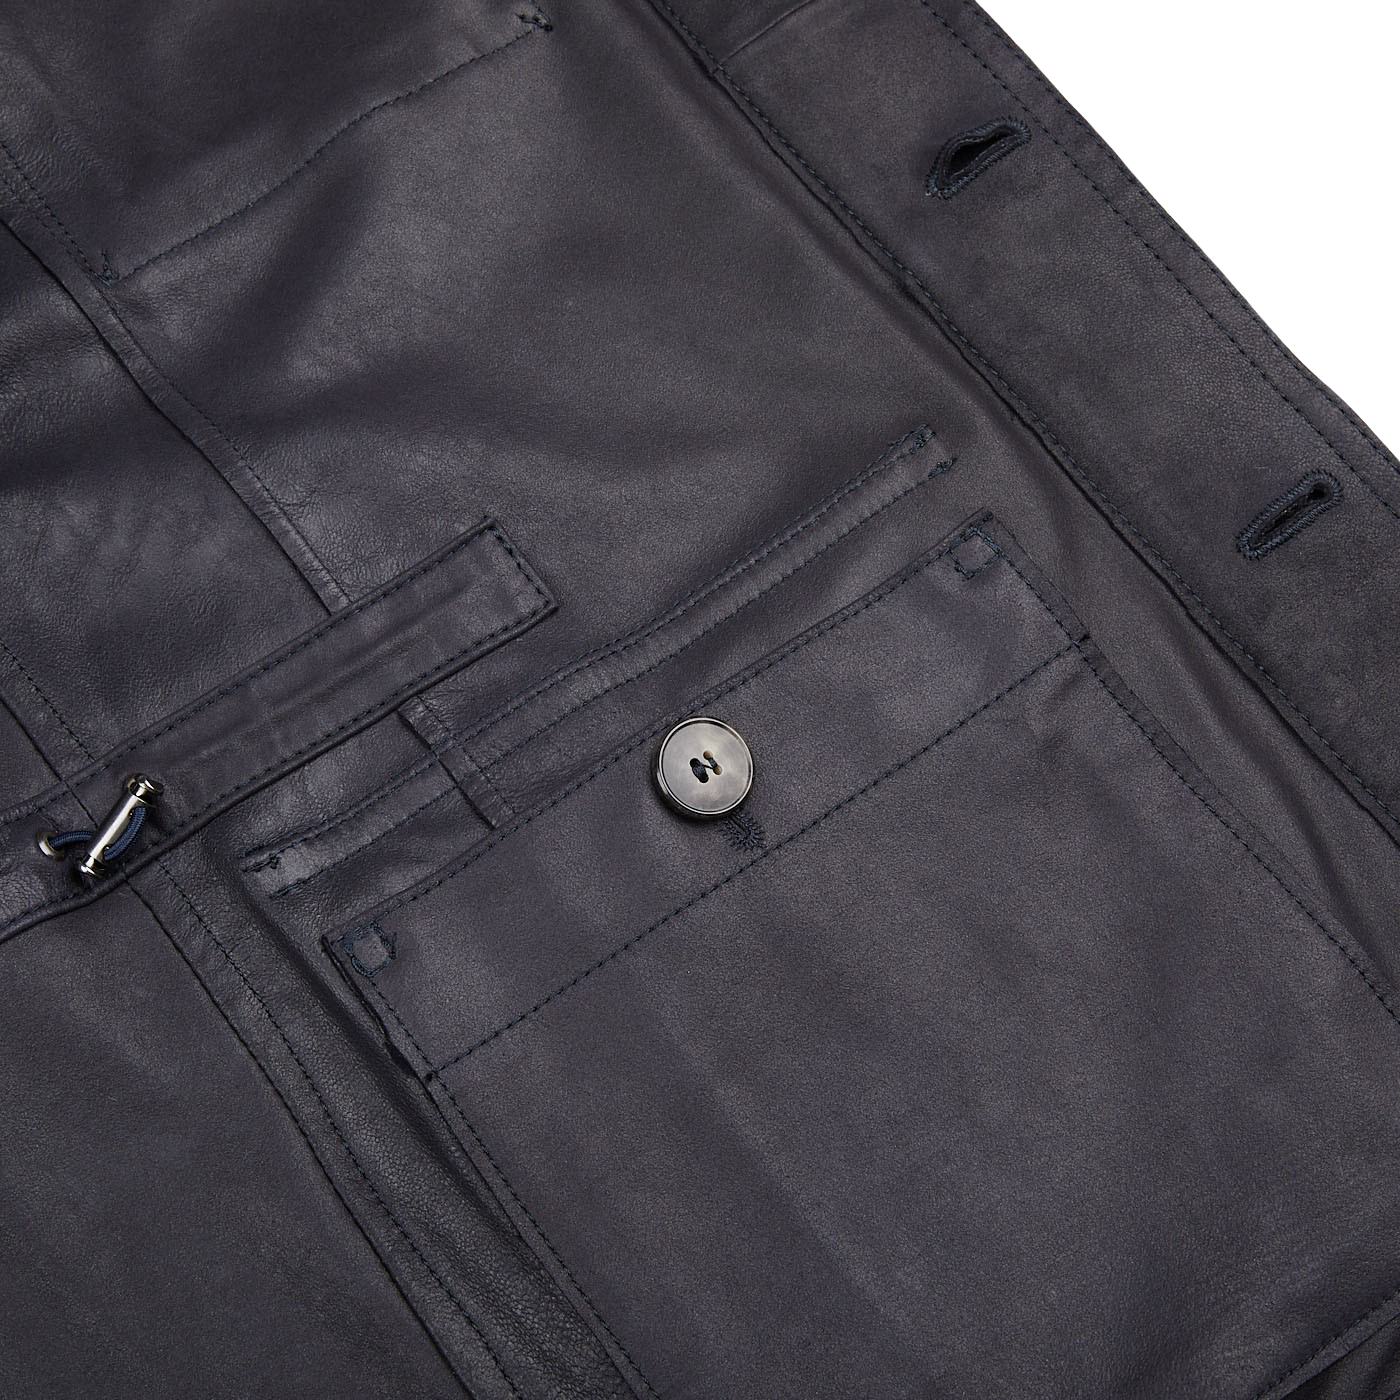 A slim-fit Navy Suede Anton leather jacket with buttons on the pockets by Werner Christ.